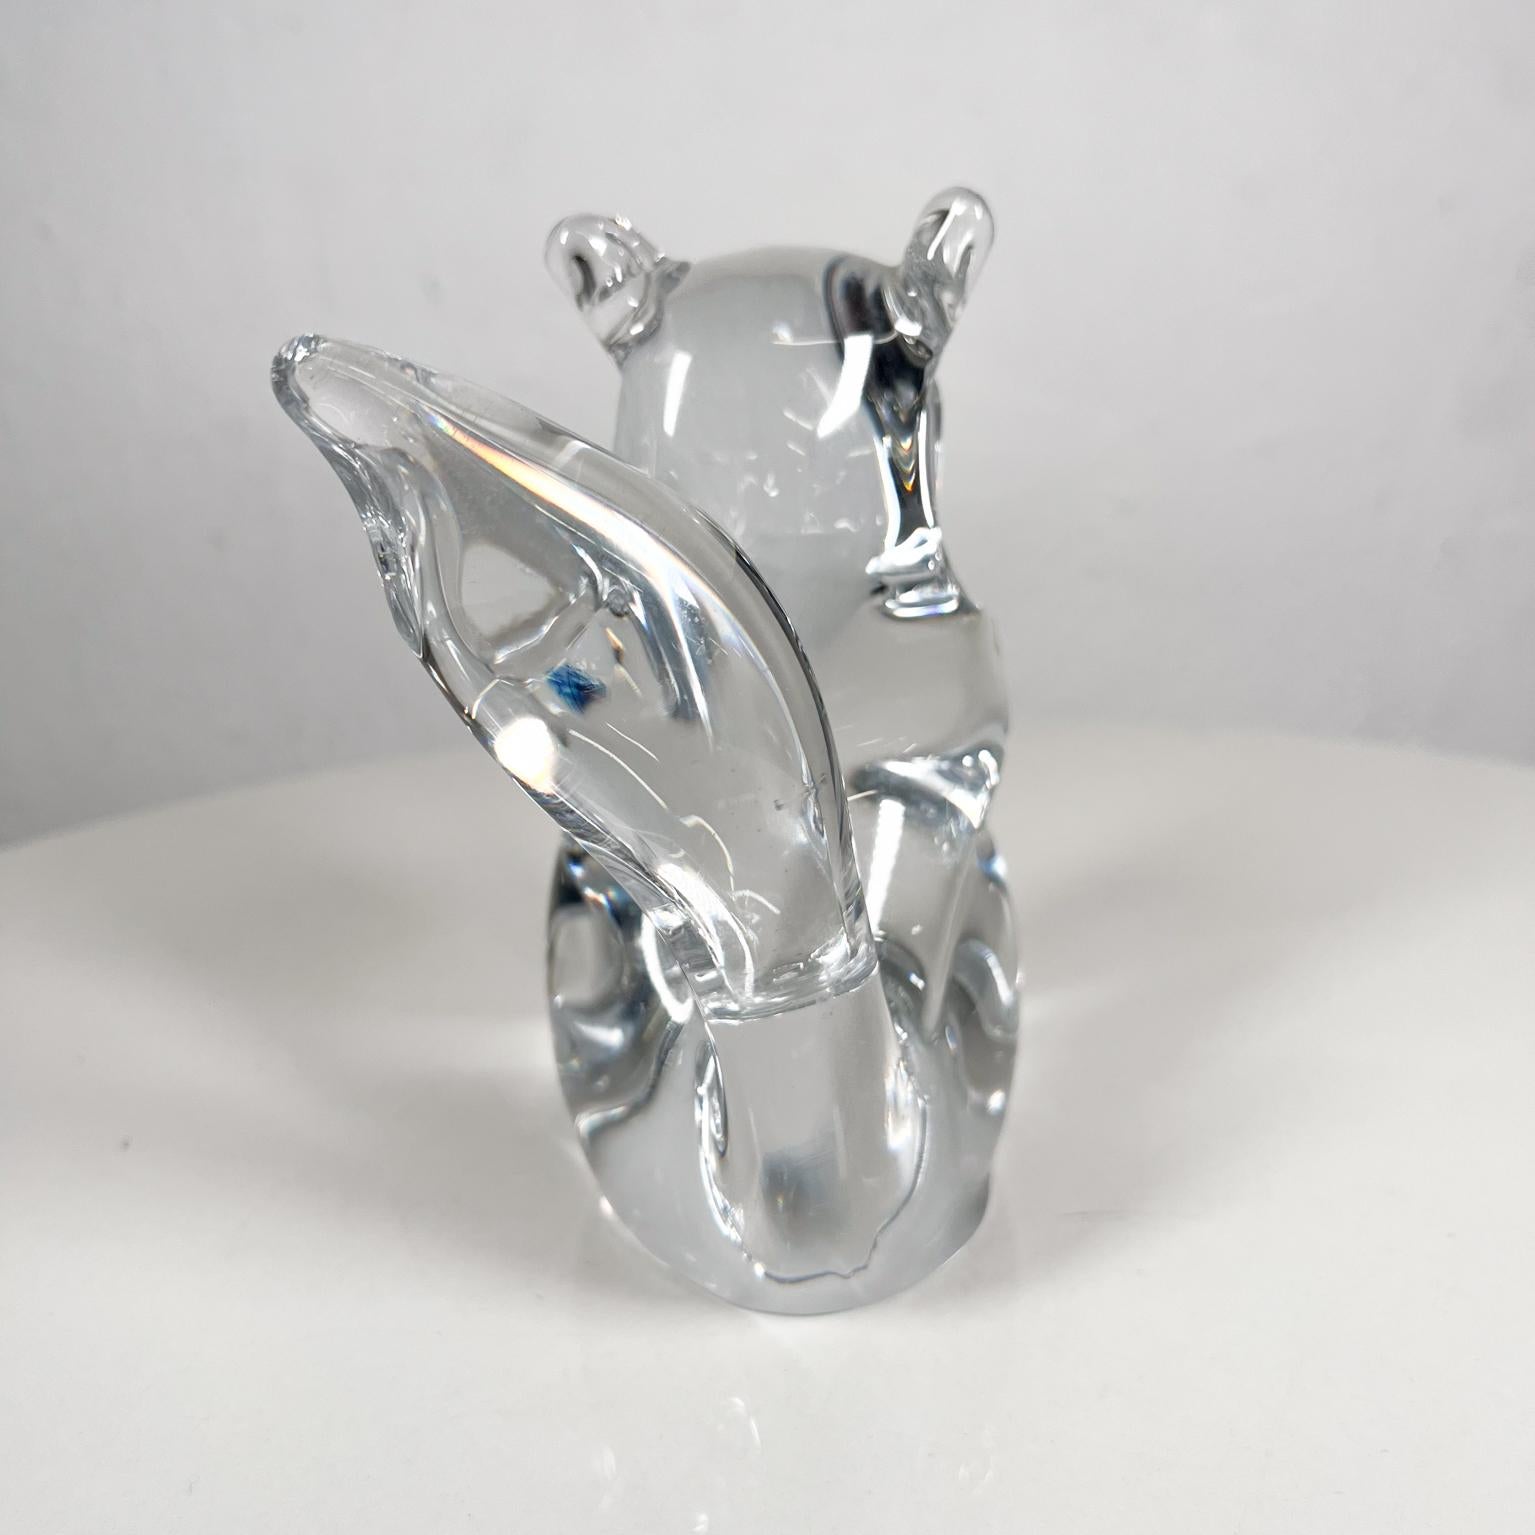 French Late 20th Century Daum France Art Crystal Sculpture Squirrel Figurine